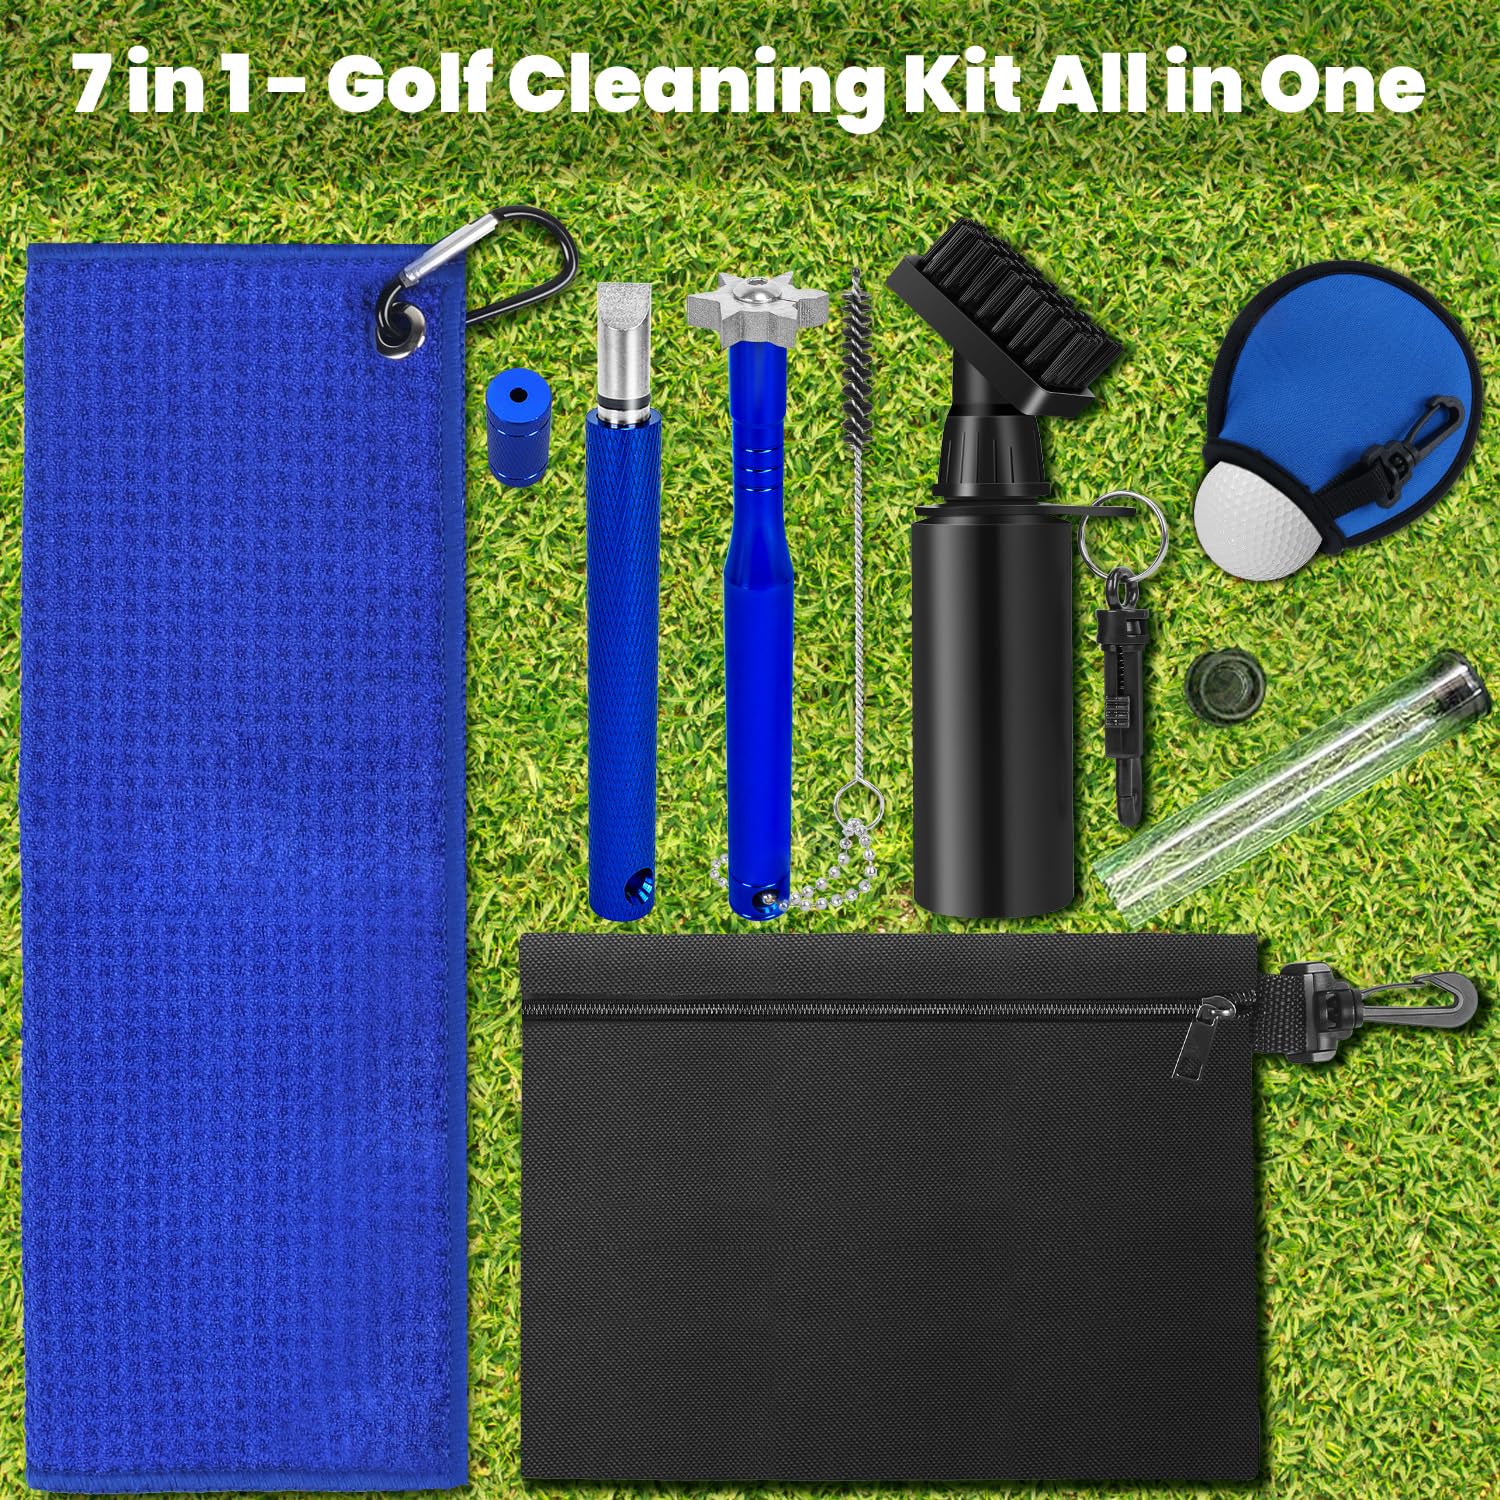 KEMETIK Golf Cleaning Tool, 2 Golf Club Groove Sharpener for U & V-Grooves, Golf Club Brush Cleaner, Golf Towel, Golf Ball Washer Pouch and Golf Tee Pouch，Golf Accessories, Golf Gifts for Men or Women